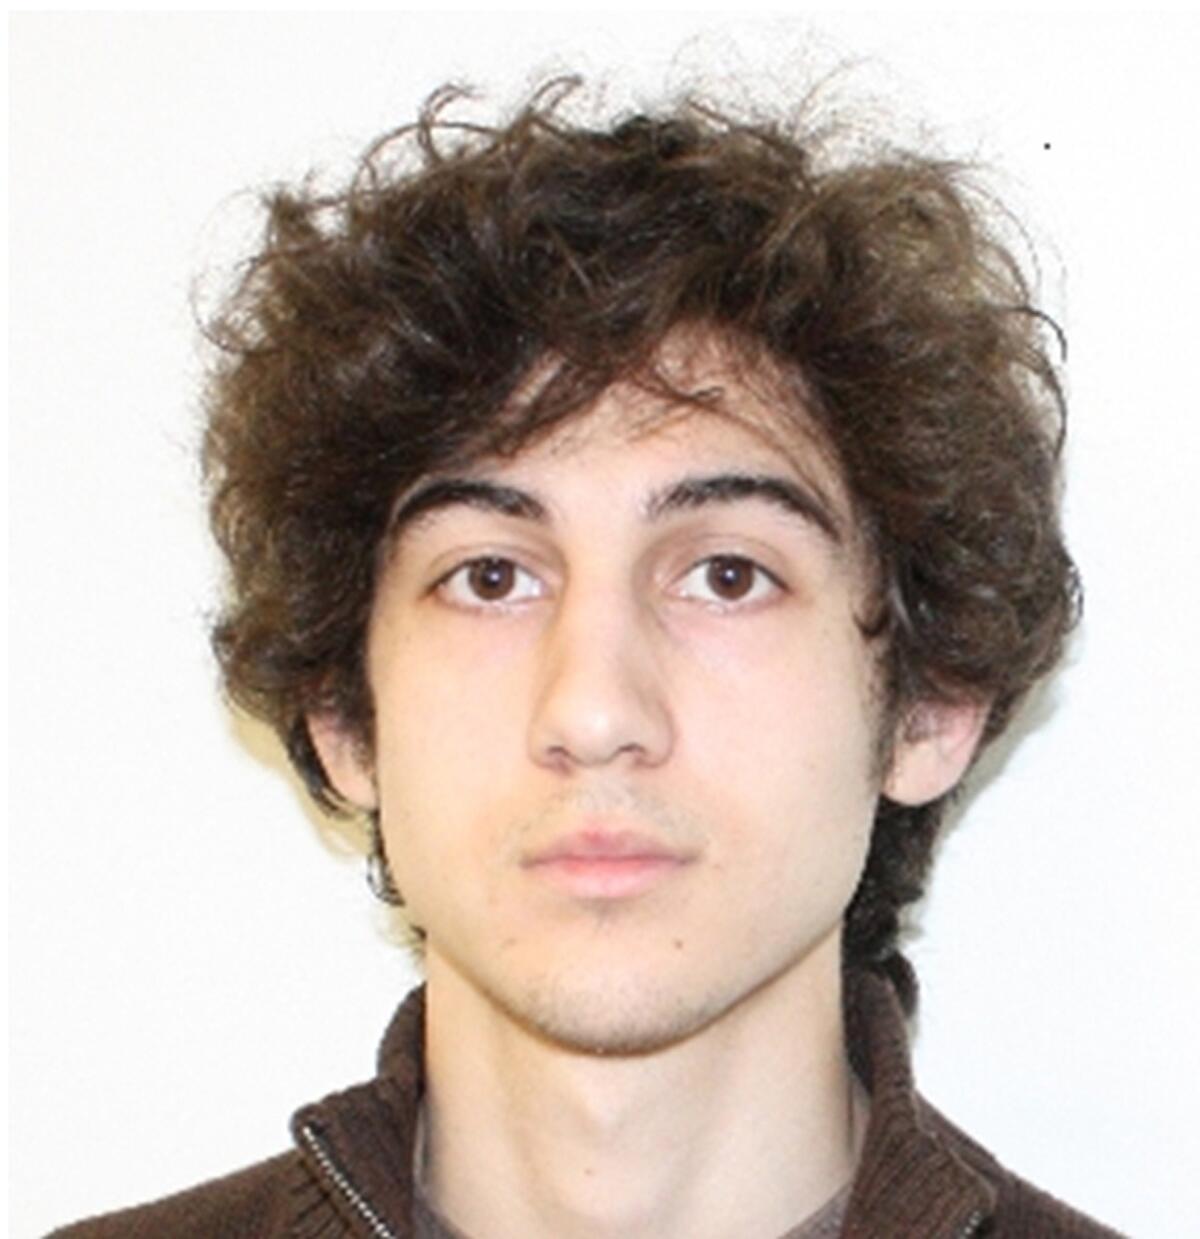 This undated FBI file image released by the FBI shows Boston Marathon bombing suspect Dzhokhar Tsarnaev. A Boston area cabdriver who was friends with the Tsarnaev and his brother has been indicted in connection with the case.